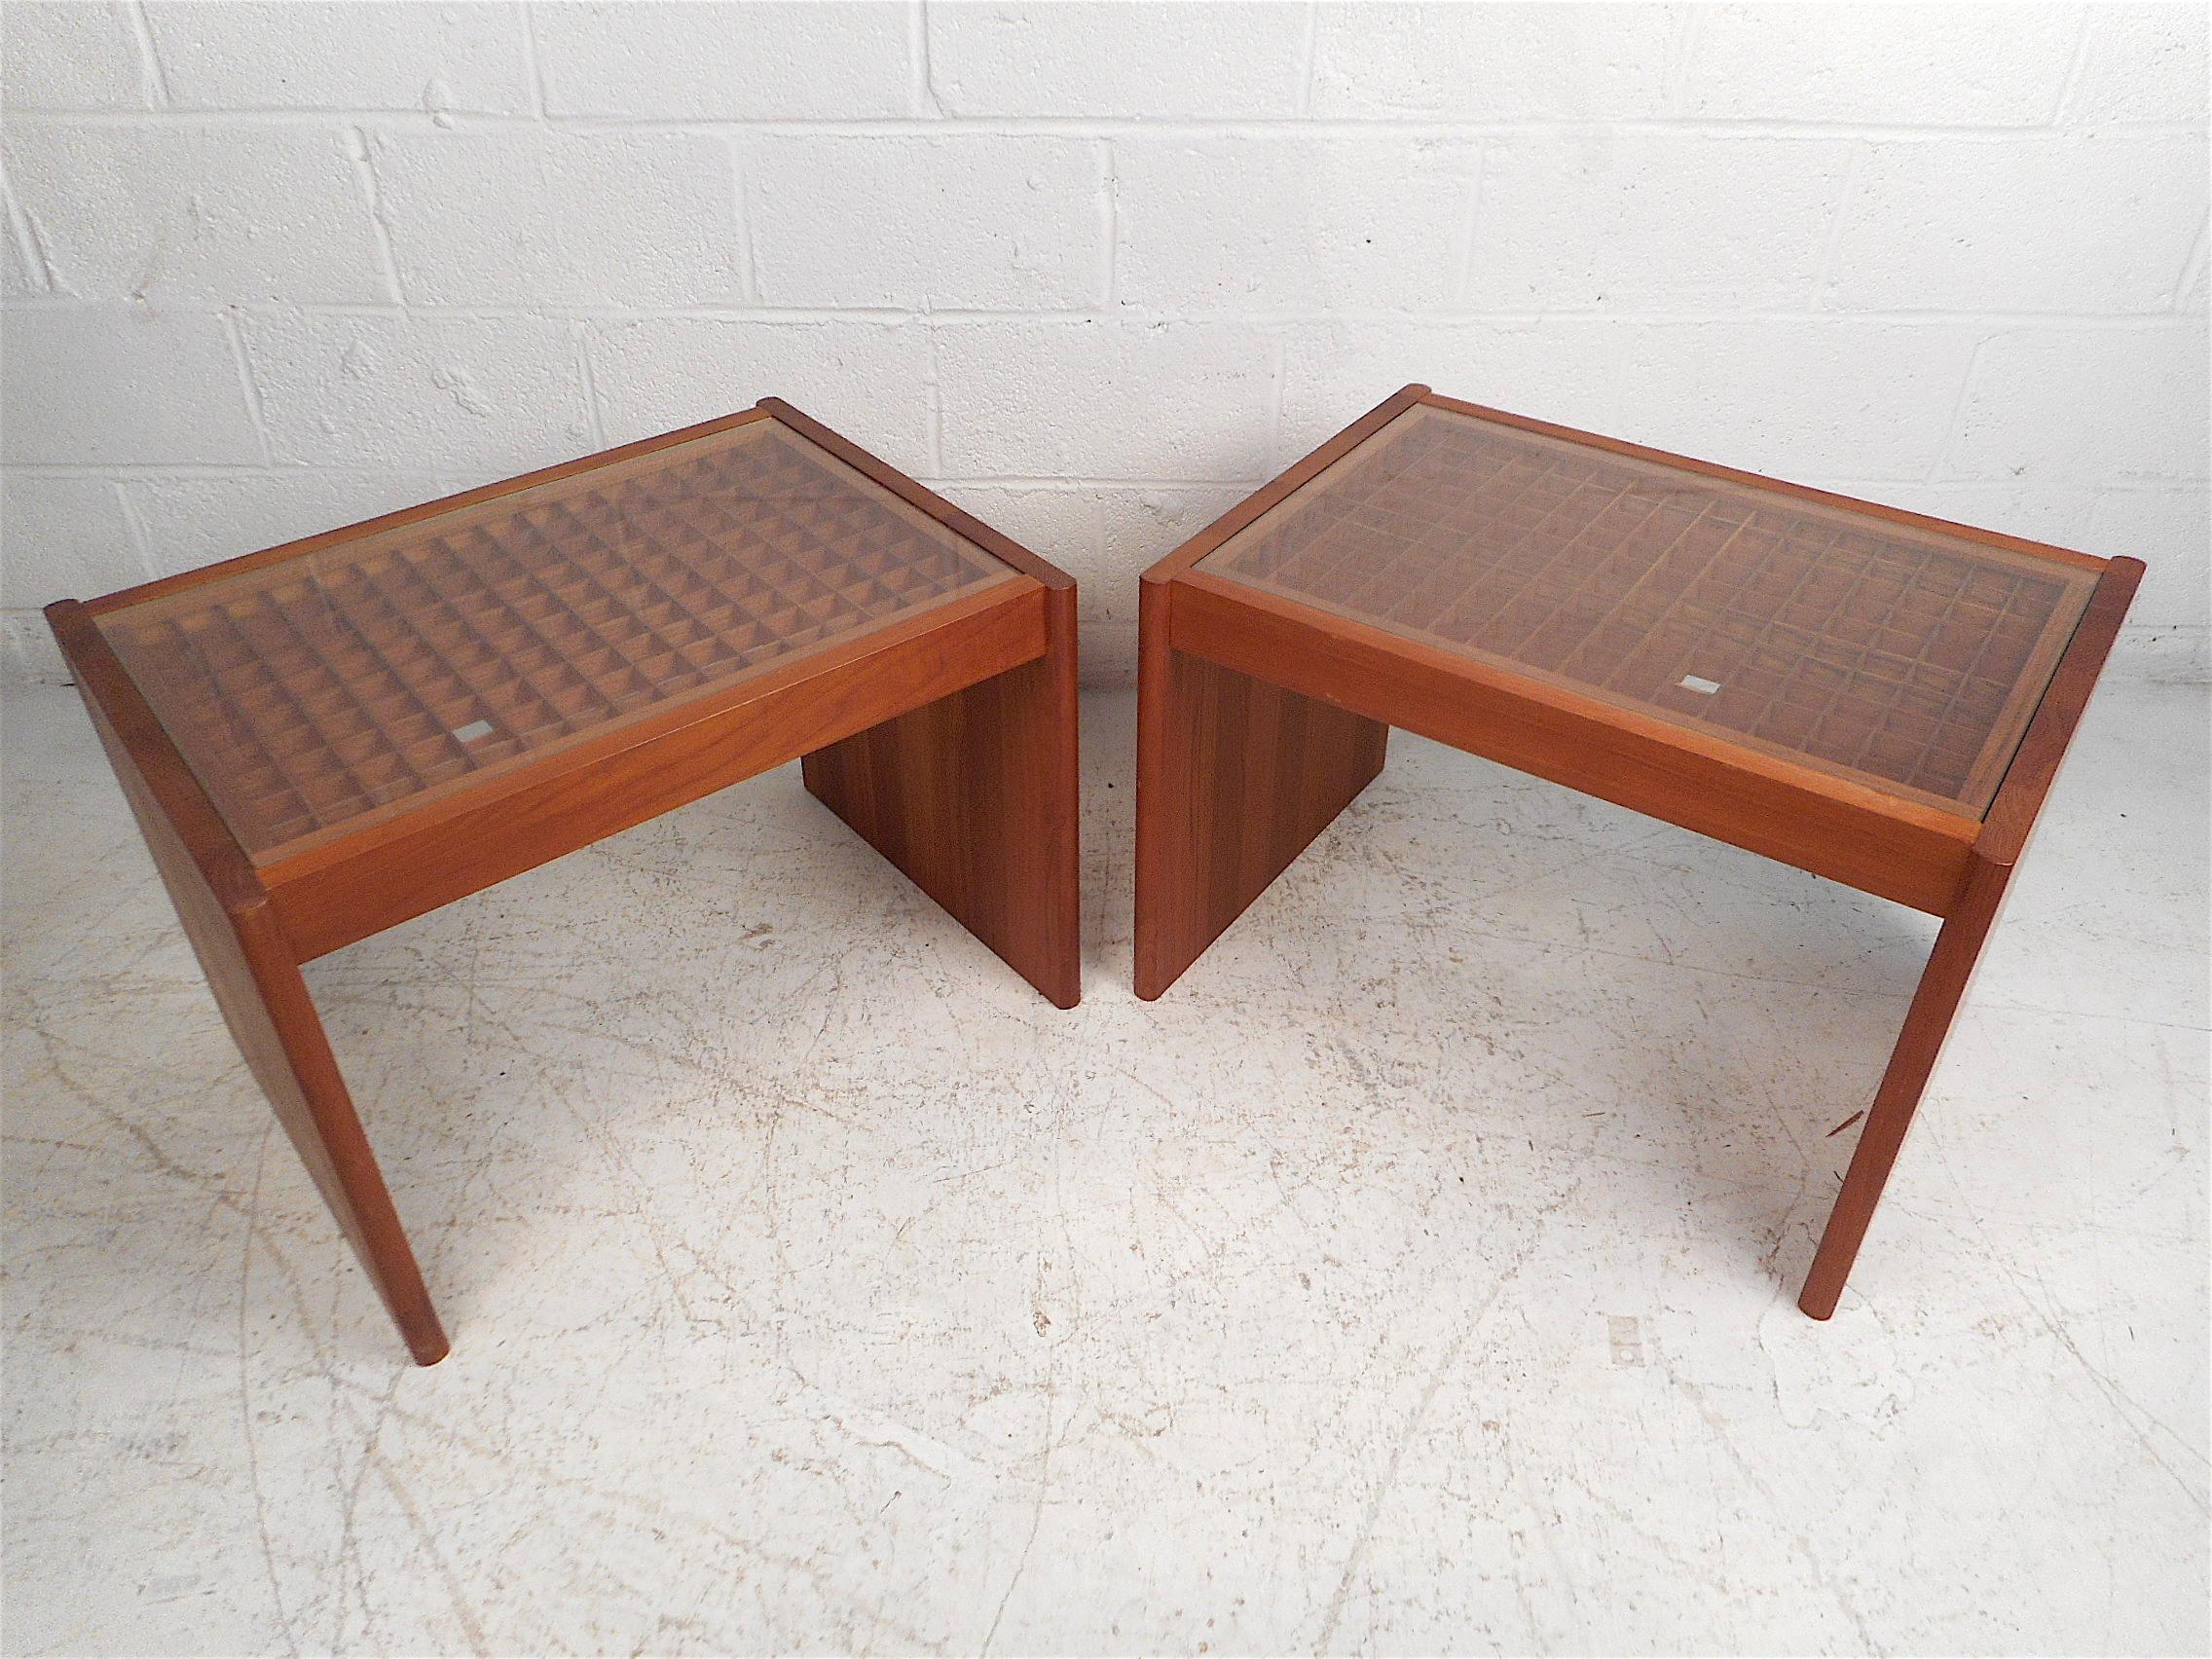 Unique Danish modern end tables by Komfort. Very unusual design with a tabletop comprised of an intricate wooden latticework design which is covered by a thin pane of glass. Handsome teak wood construction, you can see the joinery between boards on